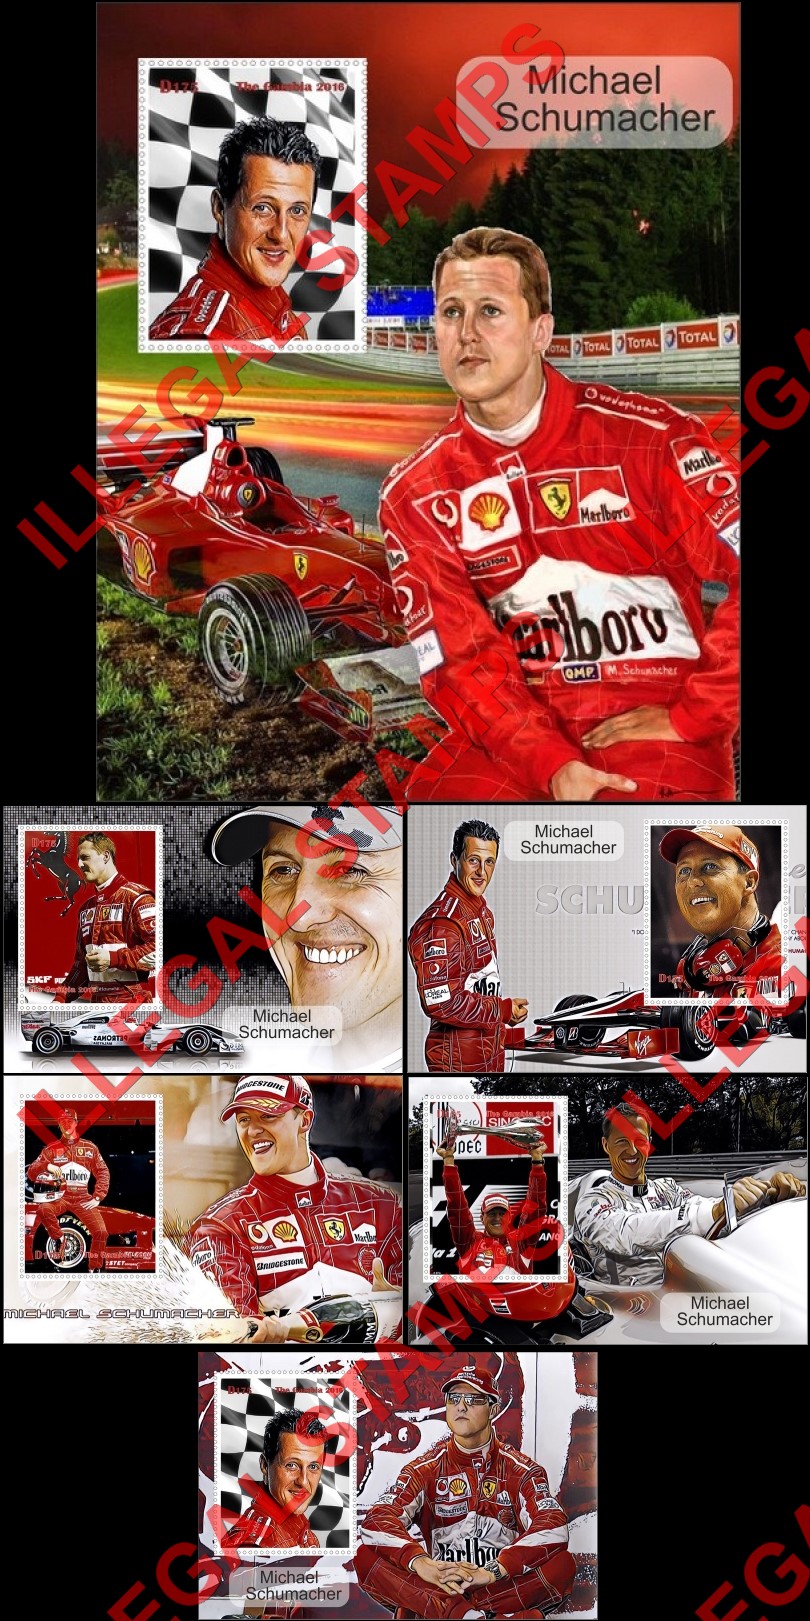 Gambia 2016 Michael Schumacher Auto Racing Illegal Stamp Souvenir Sheets of 1